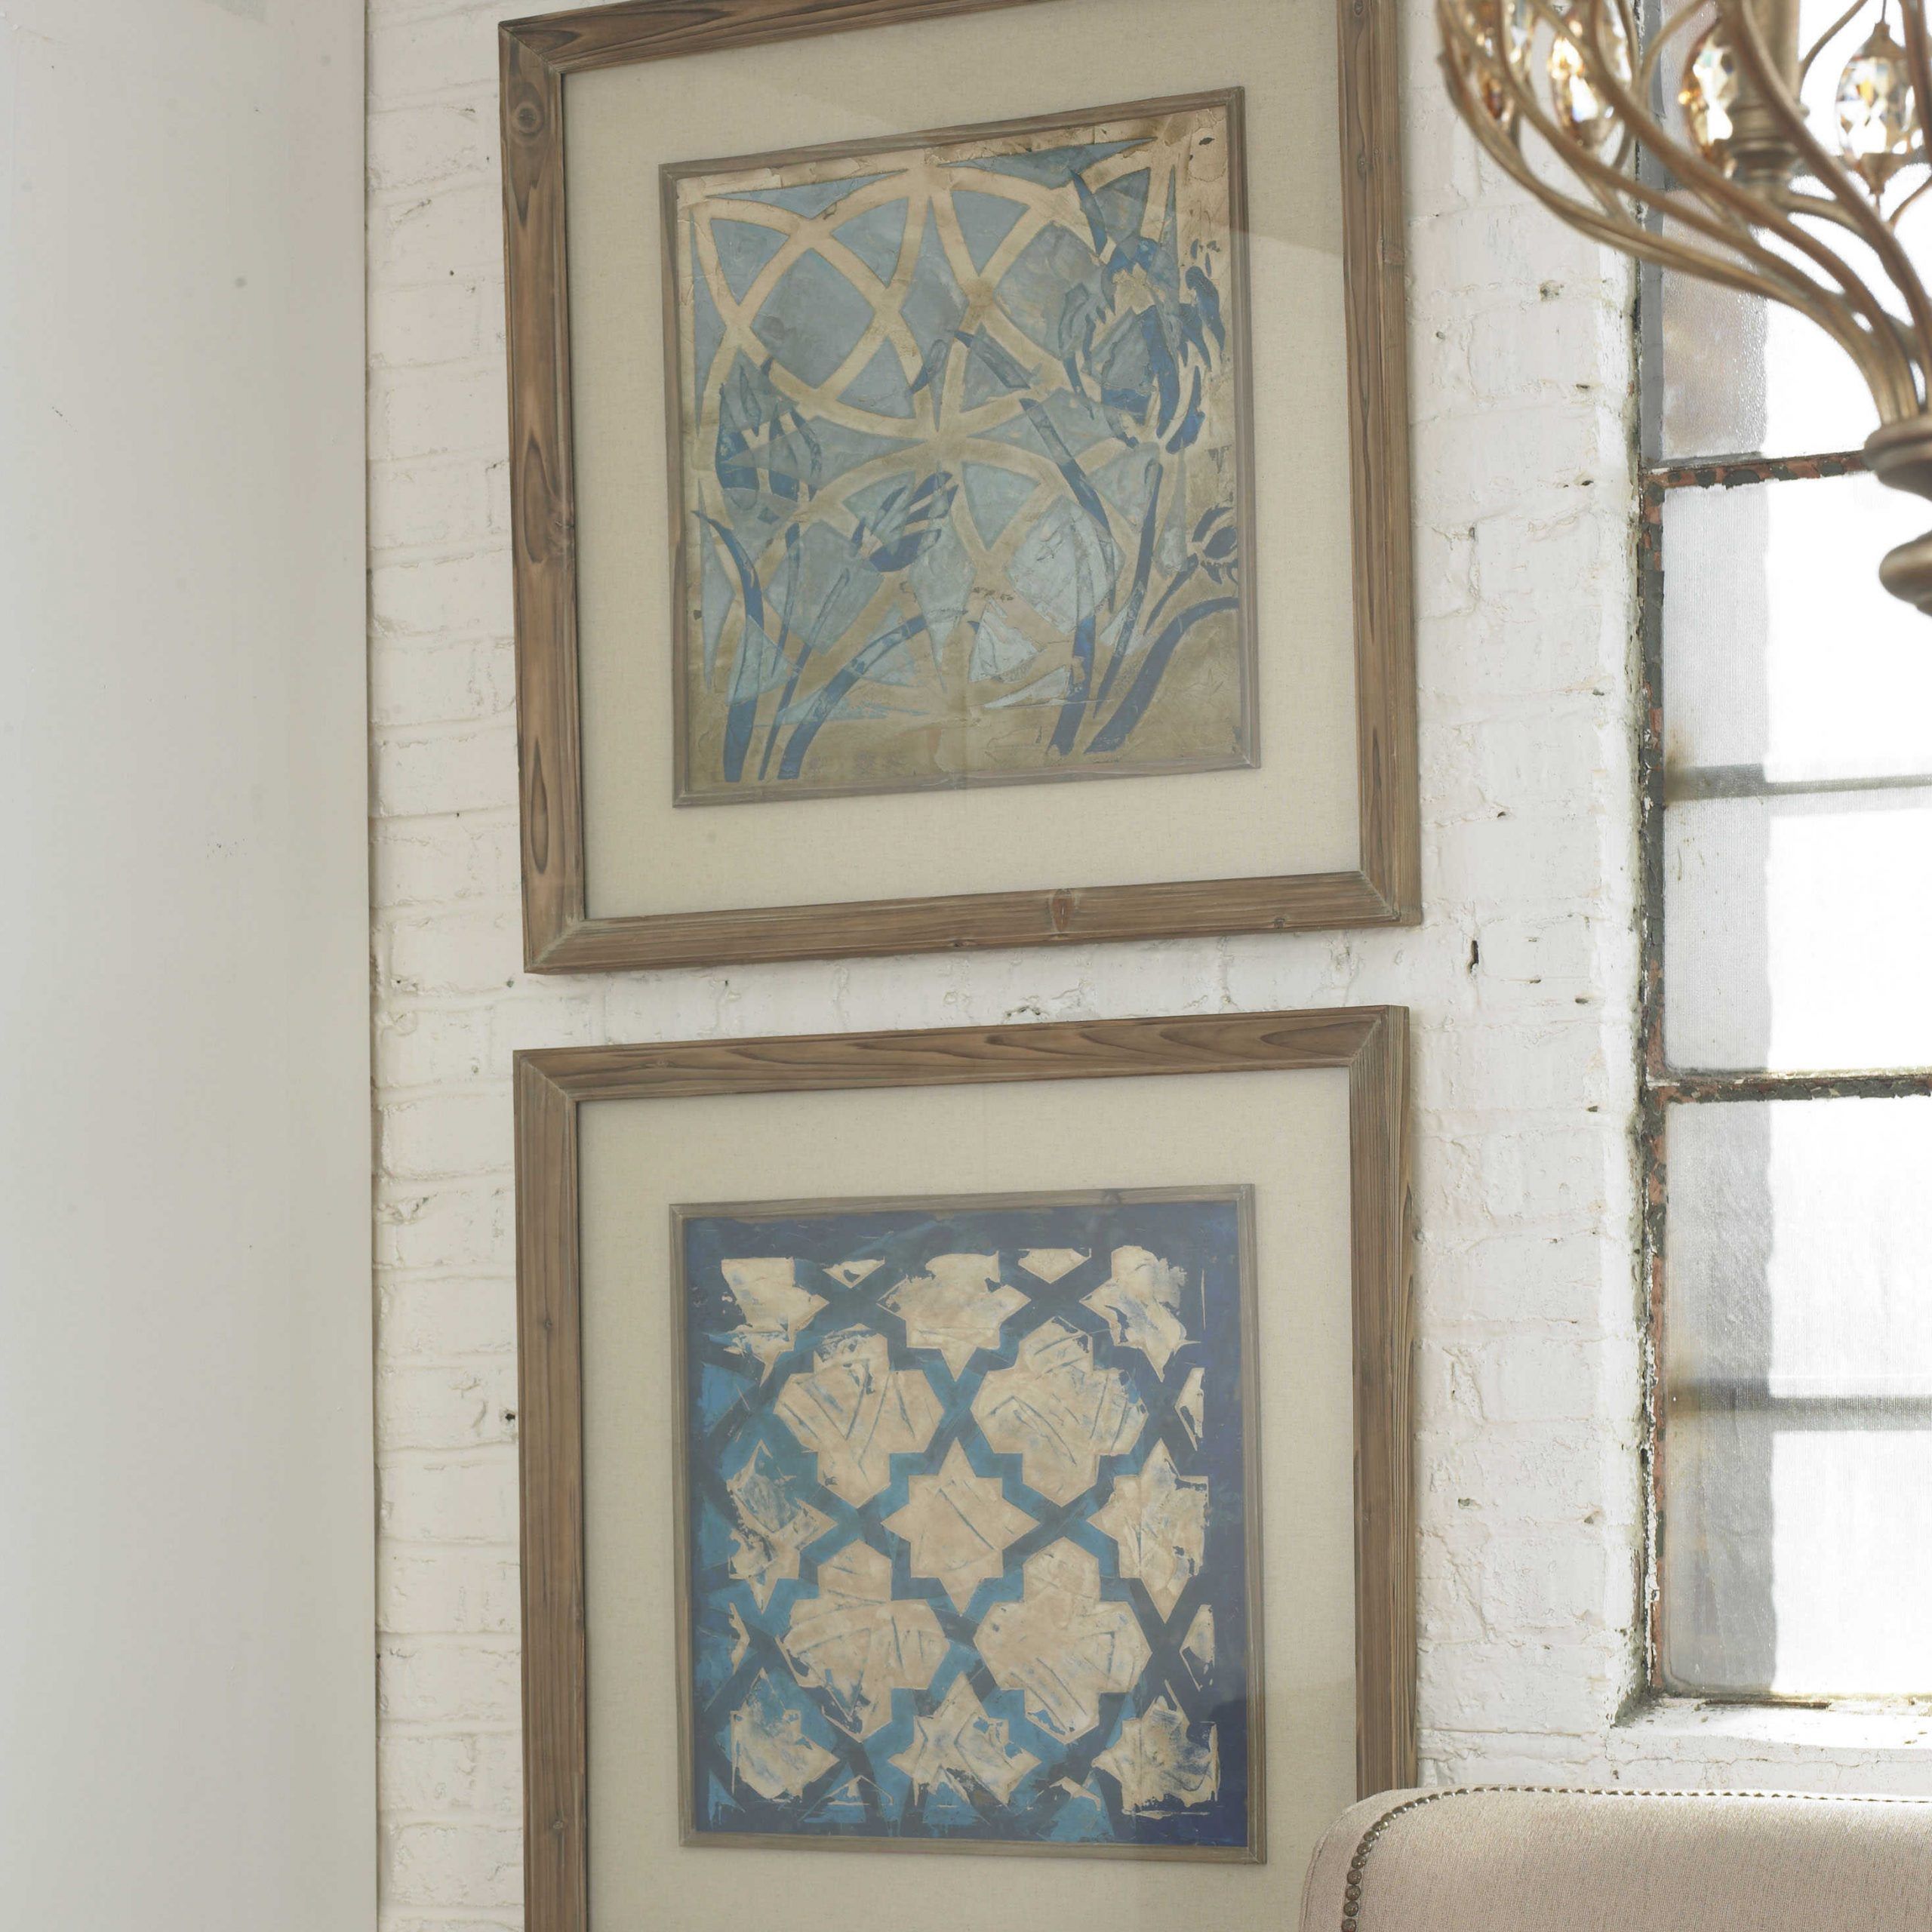 Sunshine Framed Art Prints With Regard To Newest Stained Glass Indigo Framed Prints, S/ (View 7 of 20)